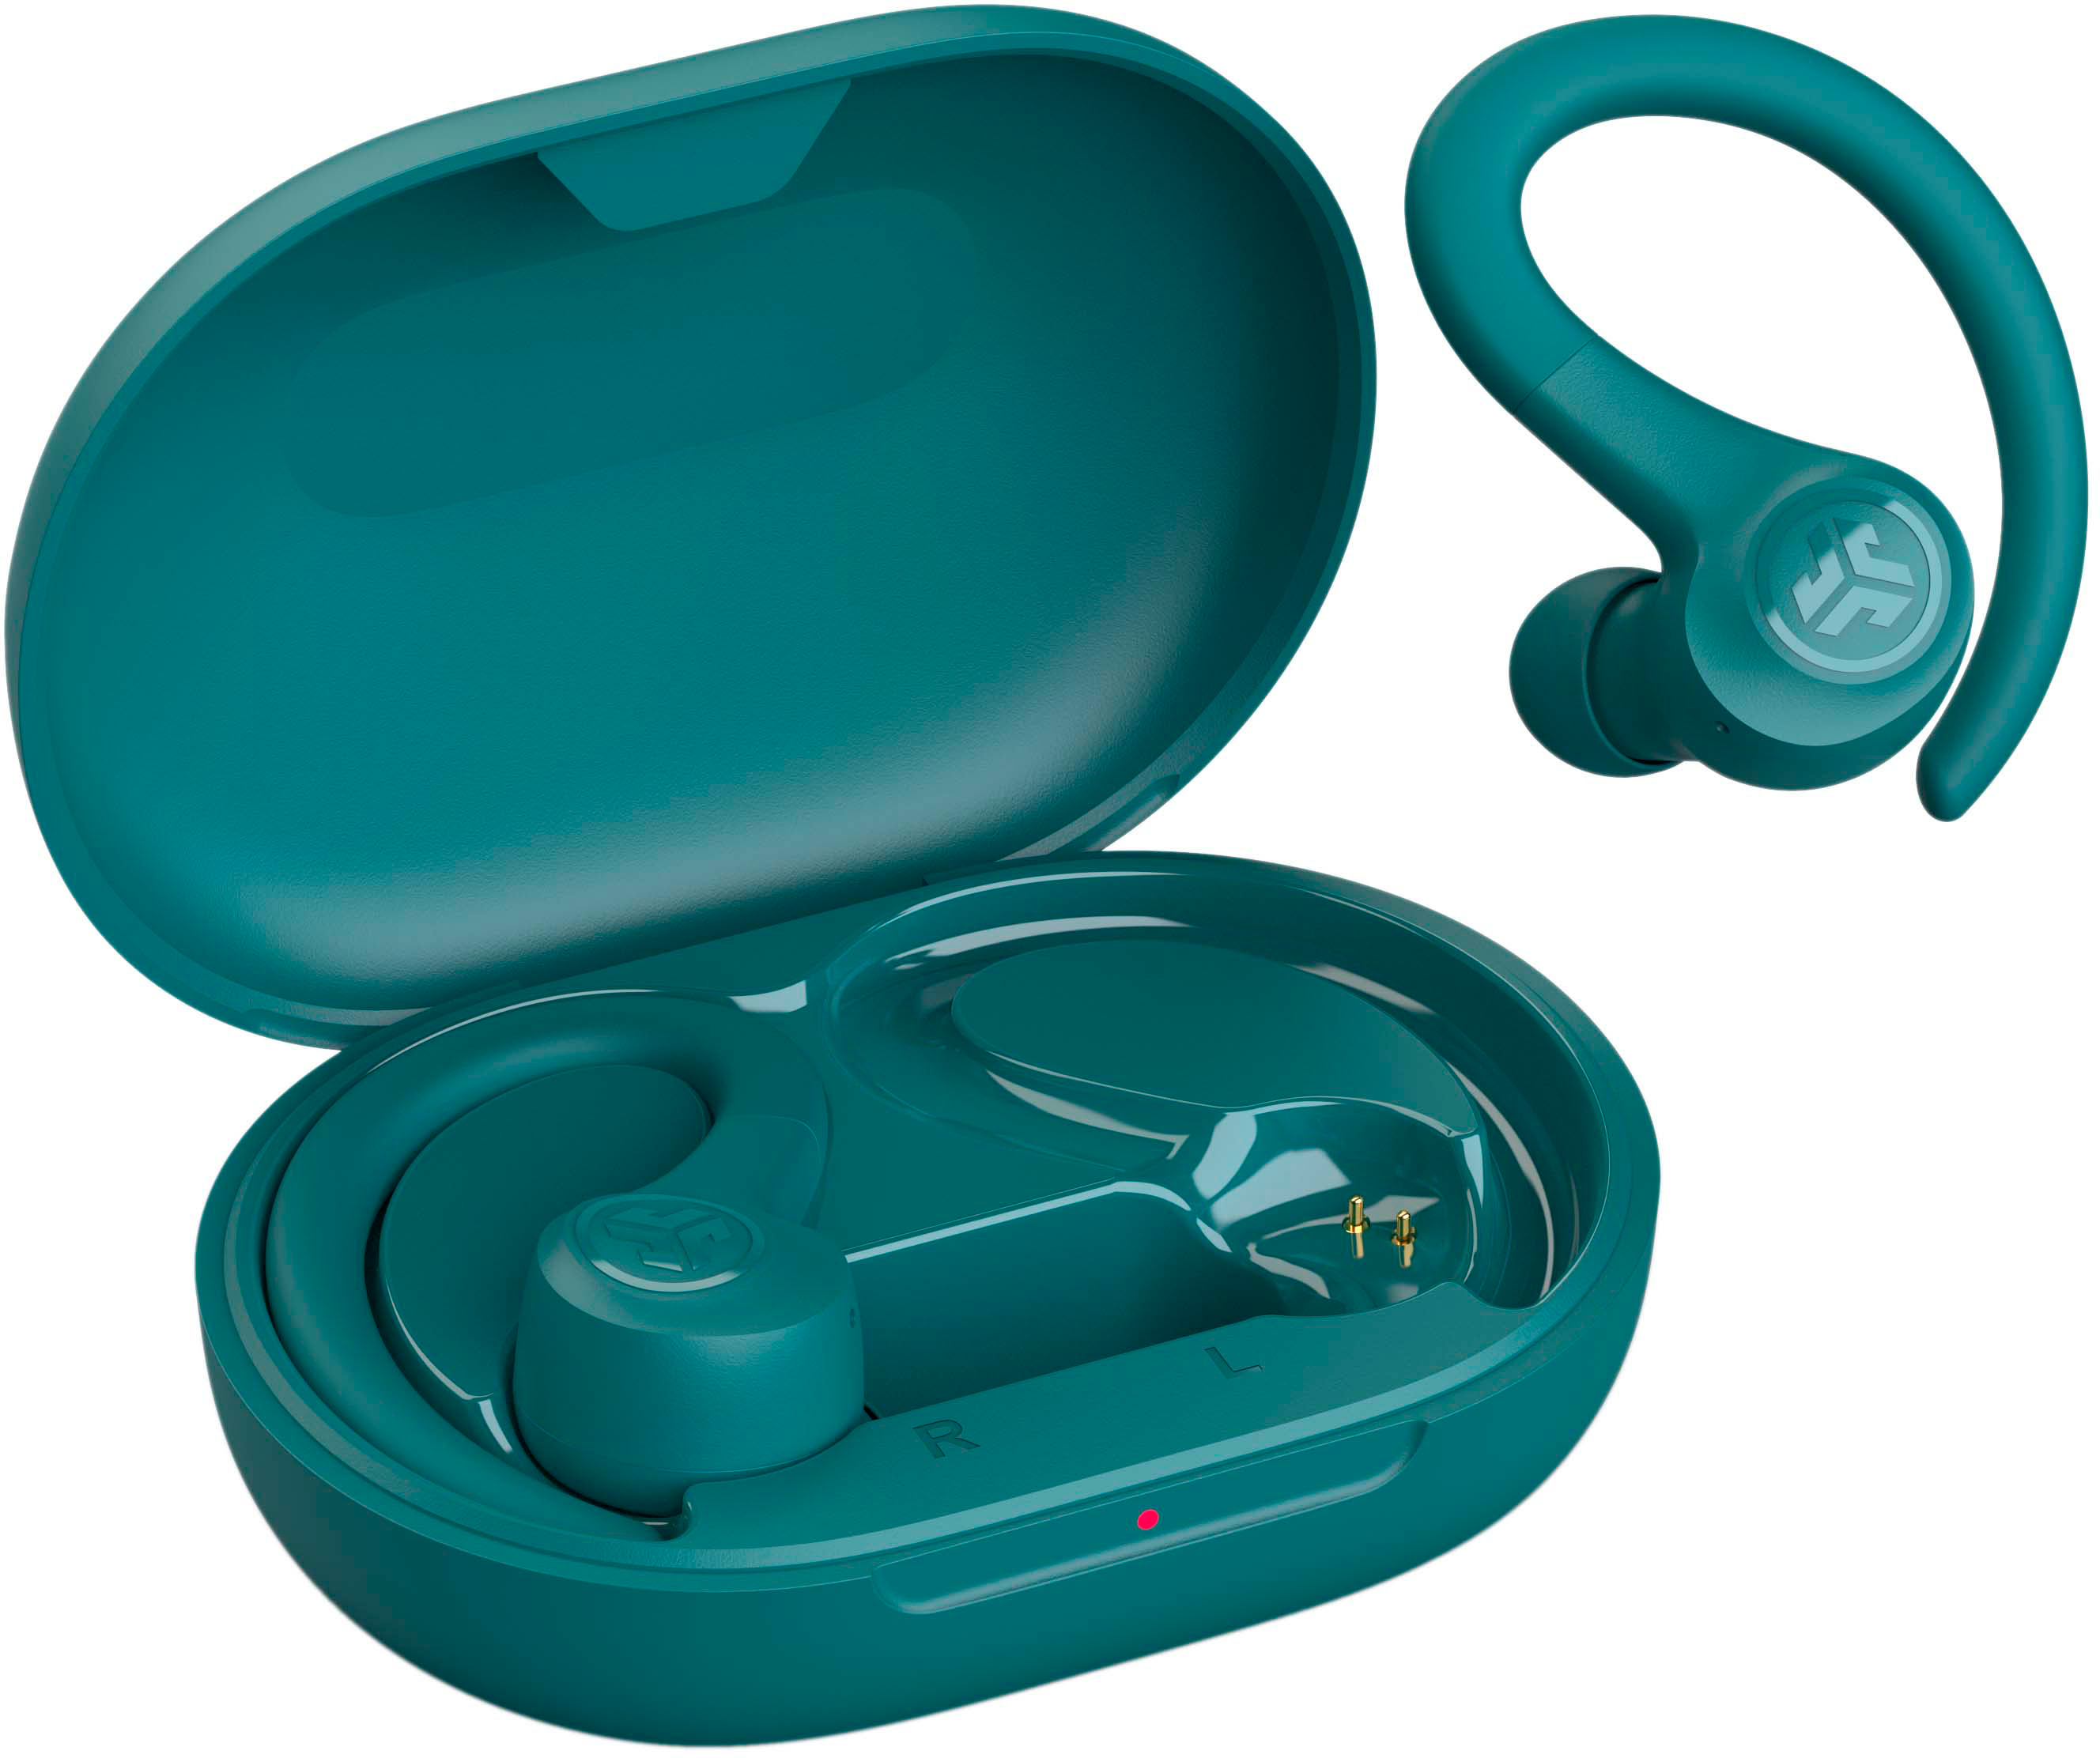 Angle View: JLab - Go Air Sport True Wireless Earbuds - Teal